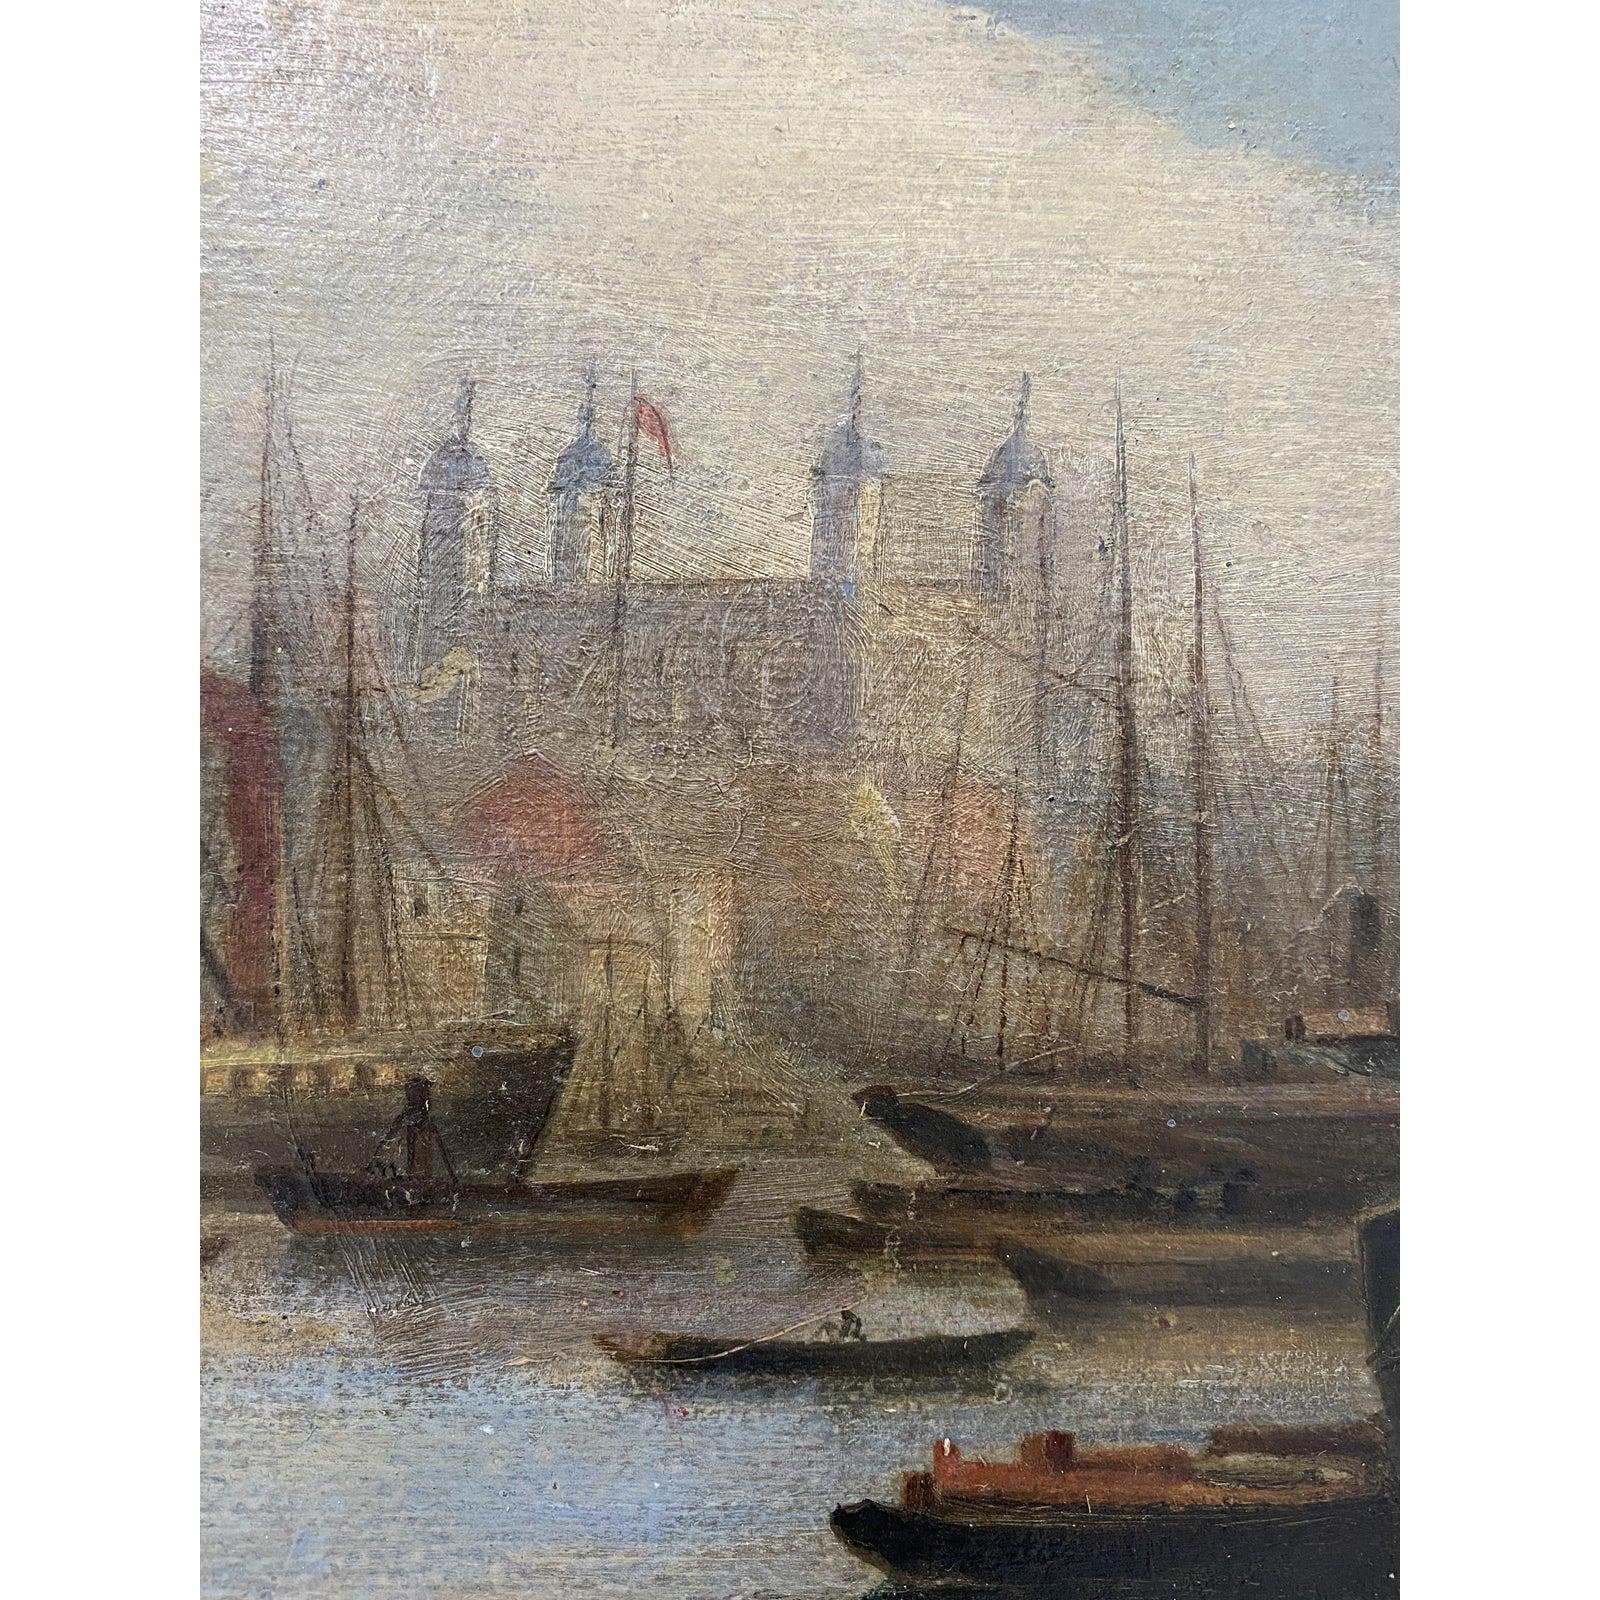 Mid 19th Century Nautical View of the Thames, London Oil Painting

A fine oil painting with the Tower of London in the background.

The panel measures 12